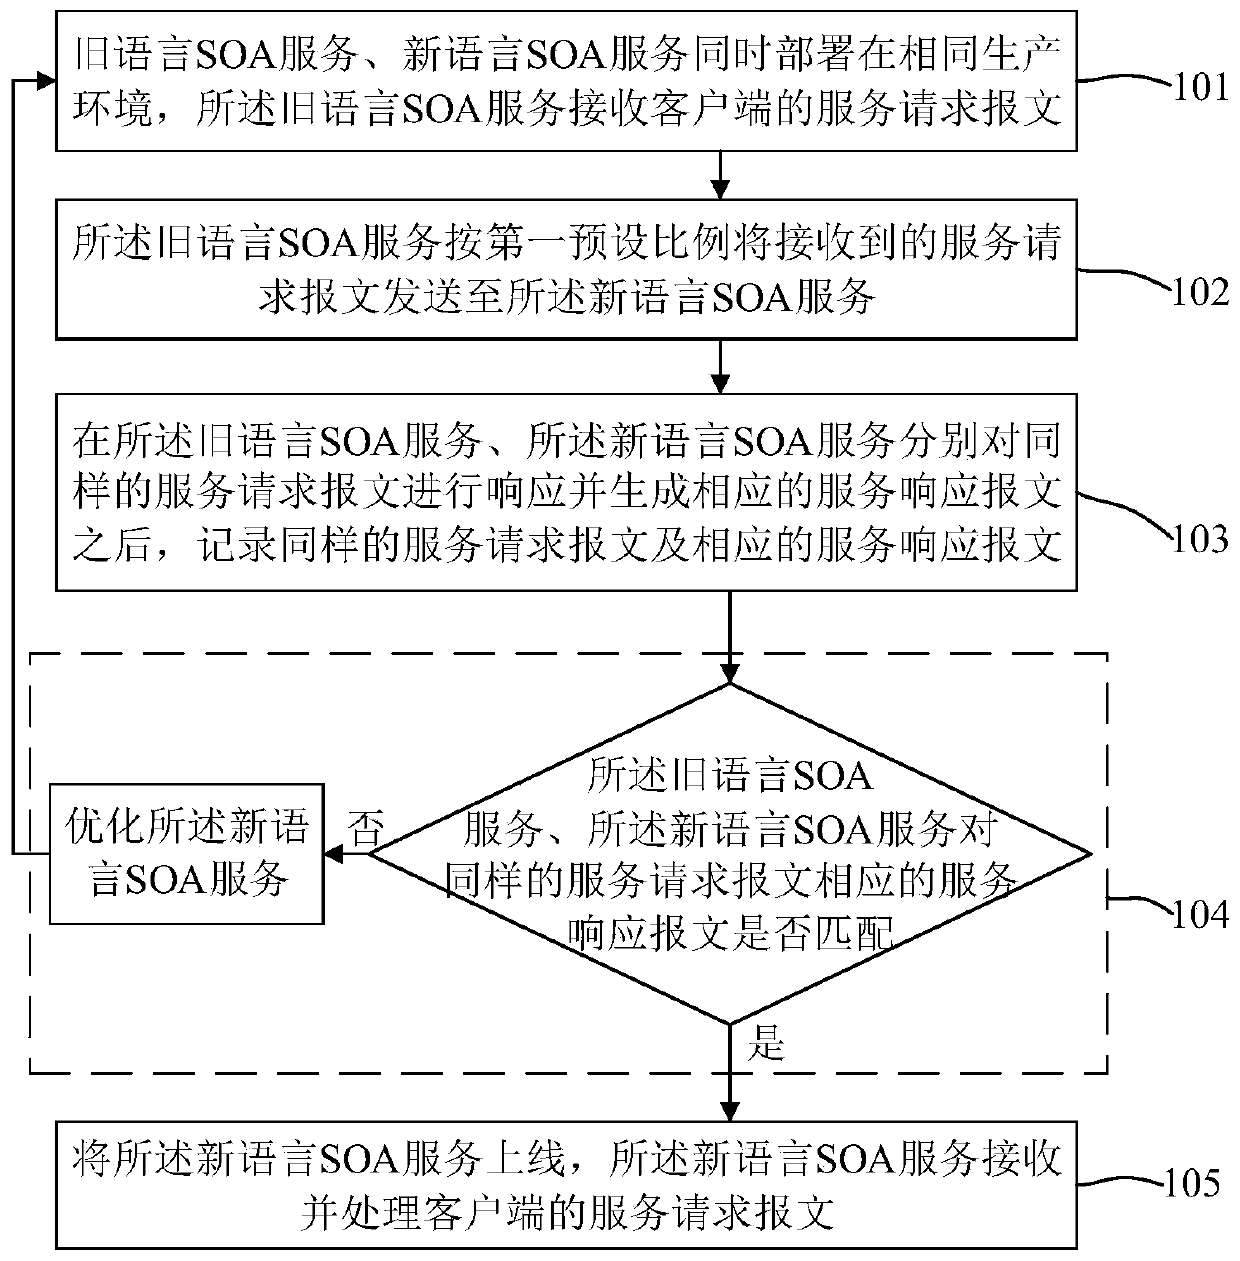 Method and system for soa service conversion language to maintain functional consistency